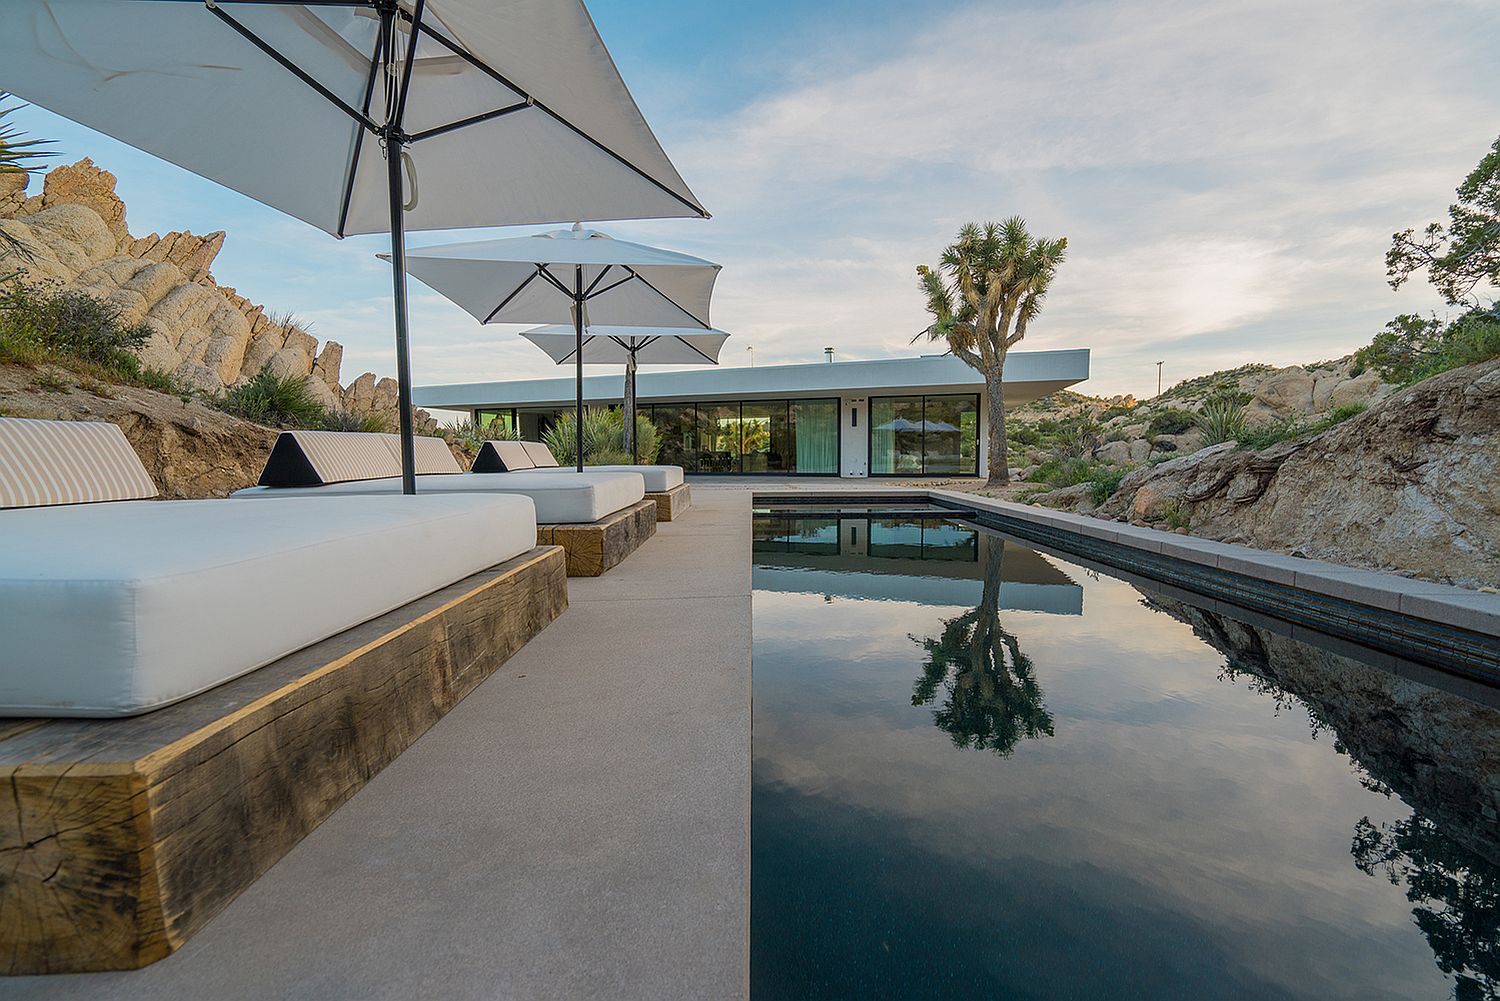 Pool design adds to the modern appeal of the residence